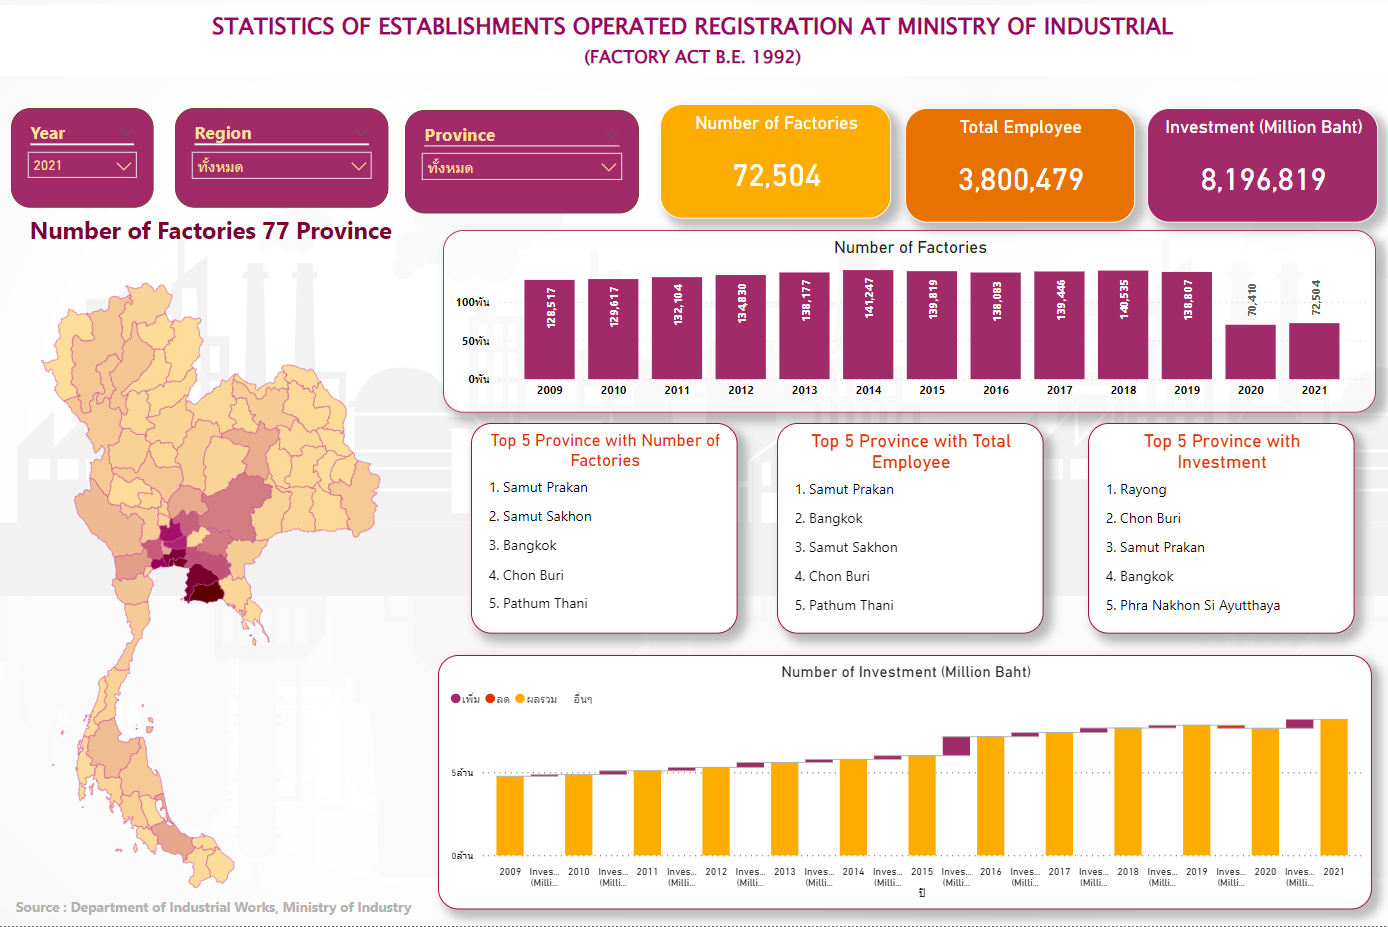 STATISTICS OF ESTABLISHMENTS OPERATED REGISTRATION AT MINISTRY OF INDUSTRIAL (FACTORY ACT B.E. 1992)